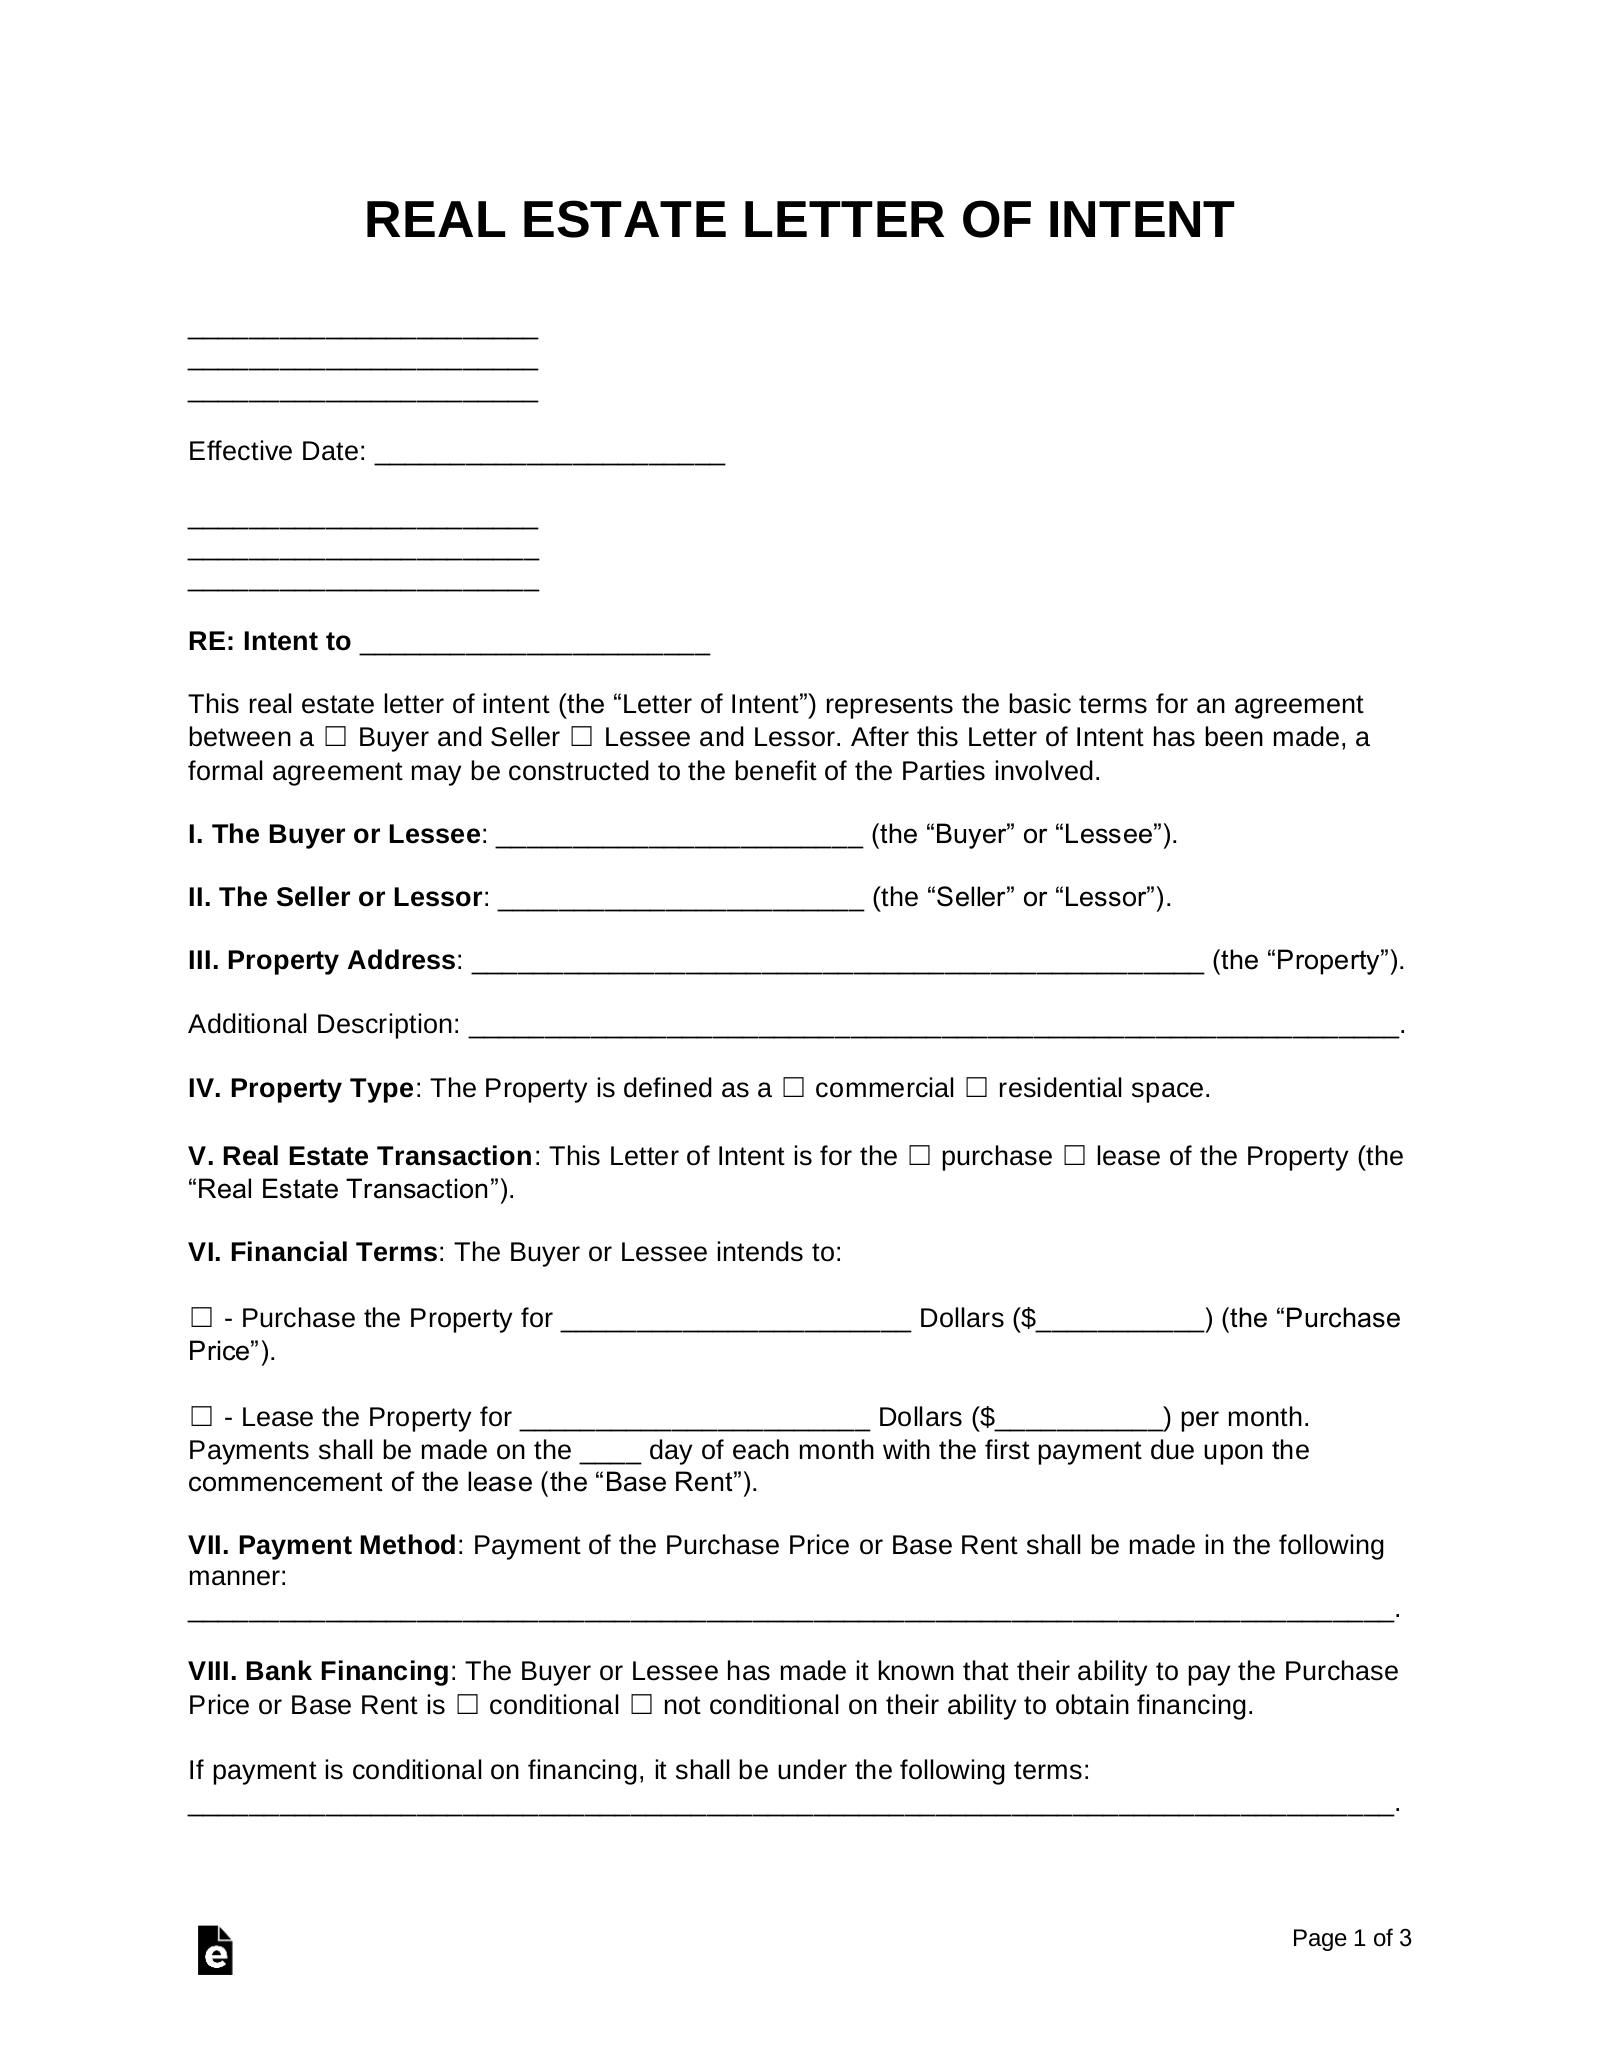 Free Real Estate Letter Of Intent – Purchase Or Lease – Word Throughout Letter Of Intent For Real Estate Purchase Template